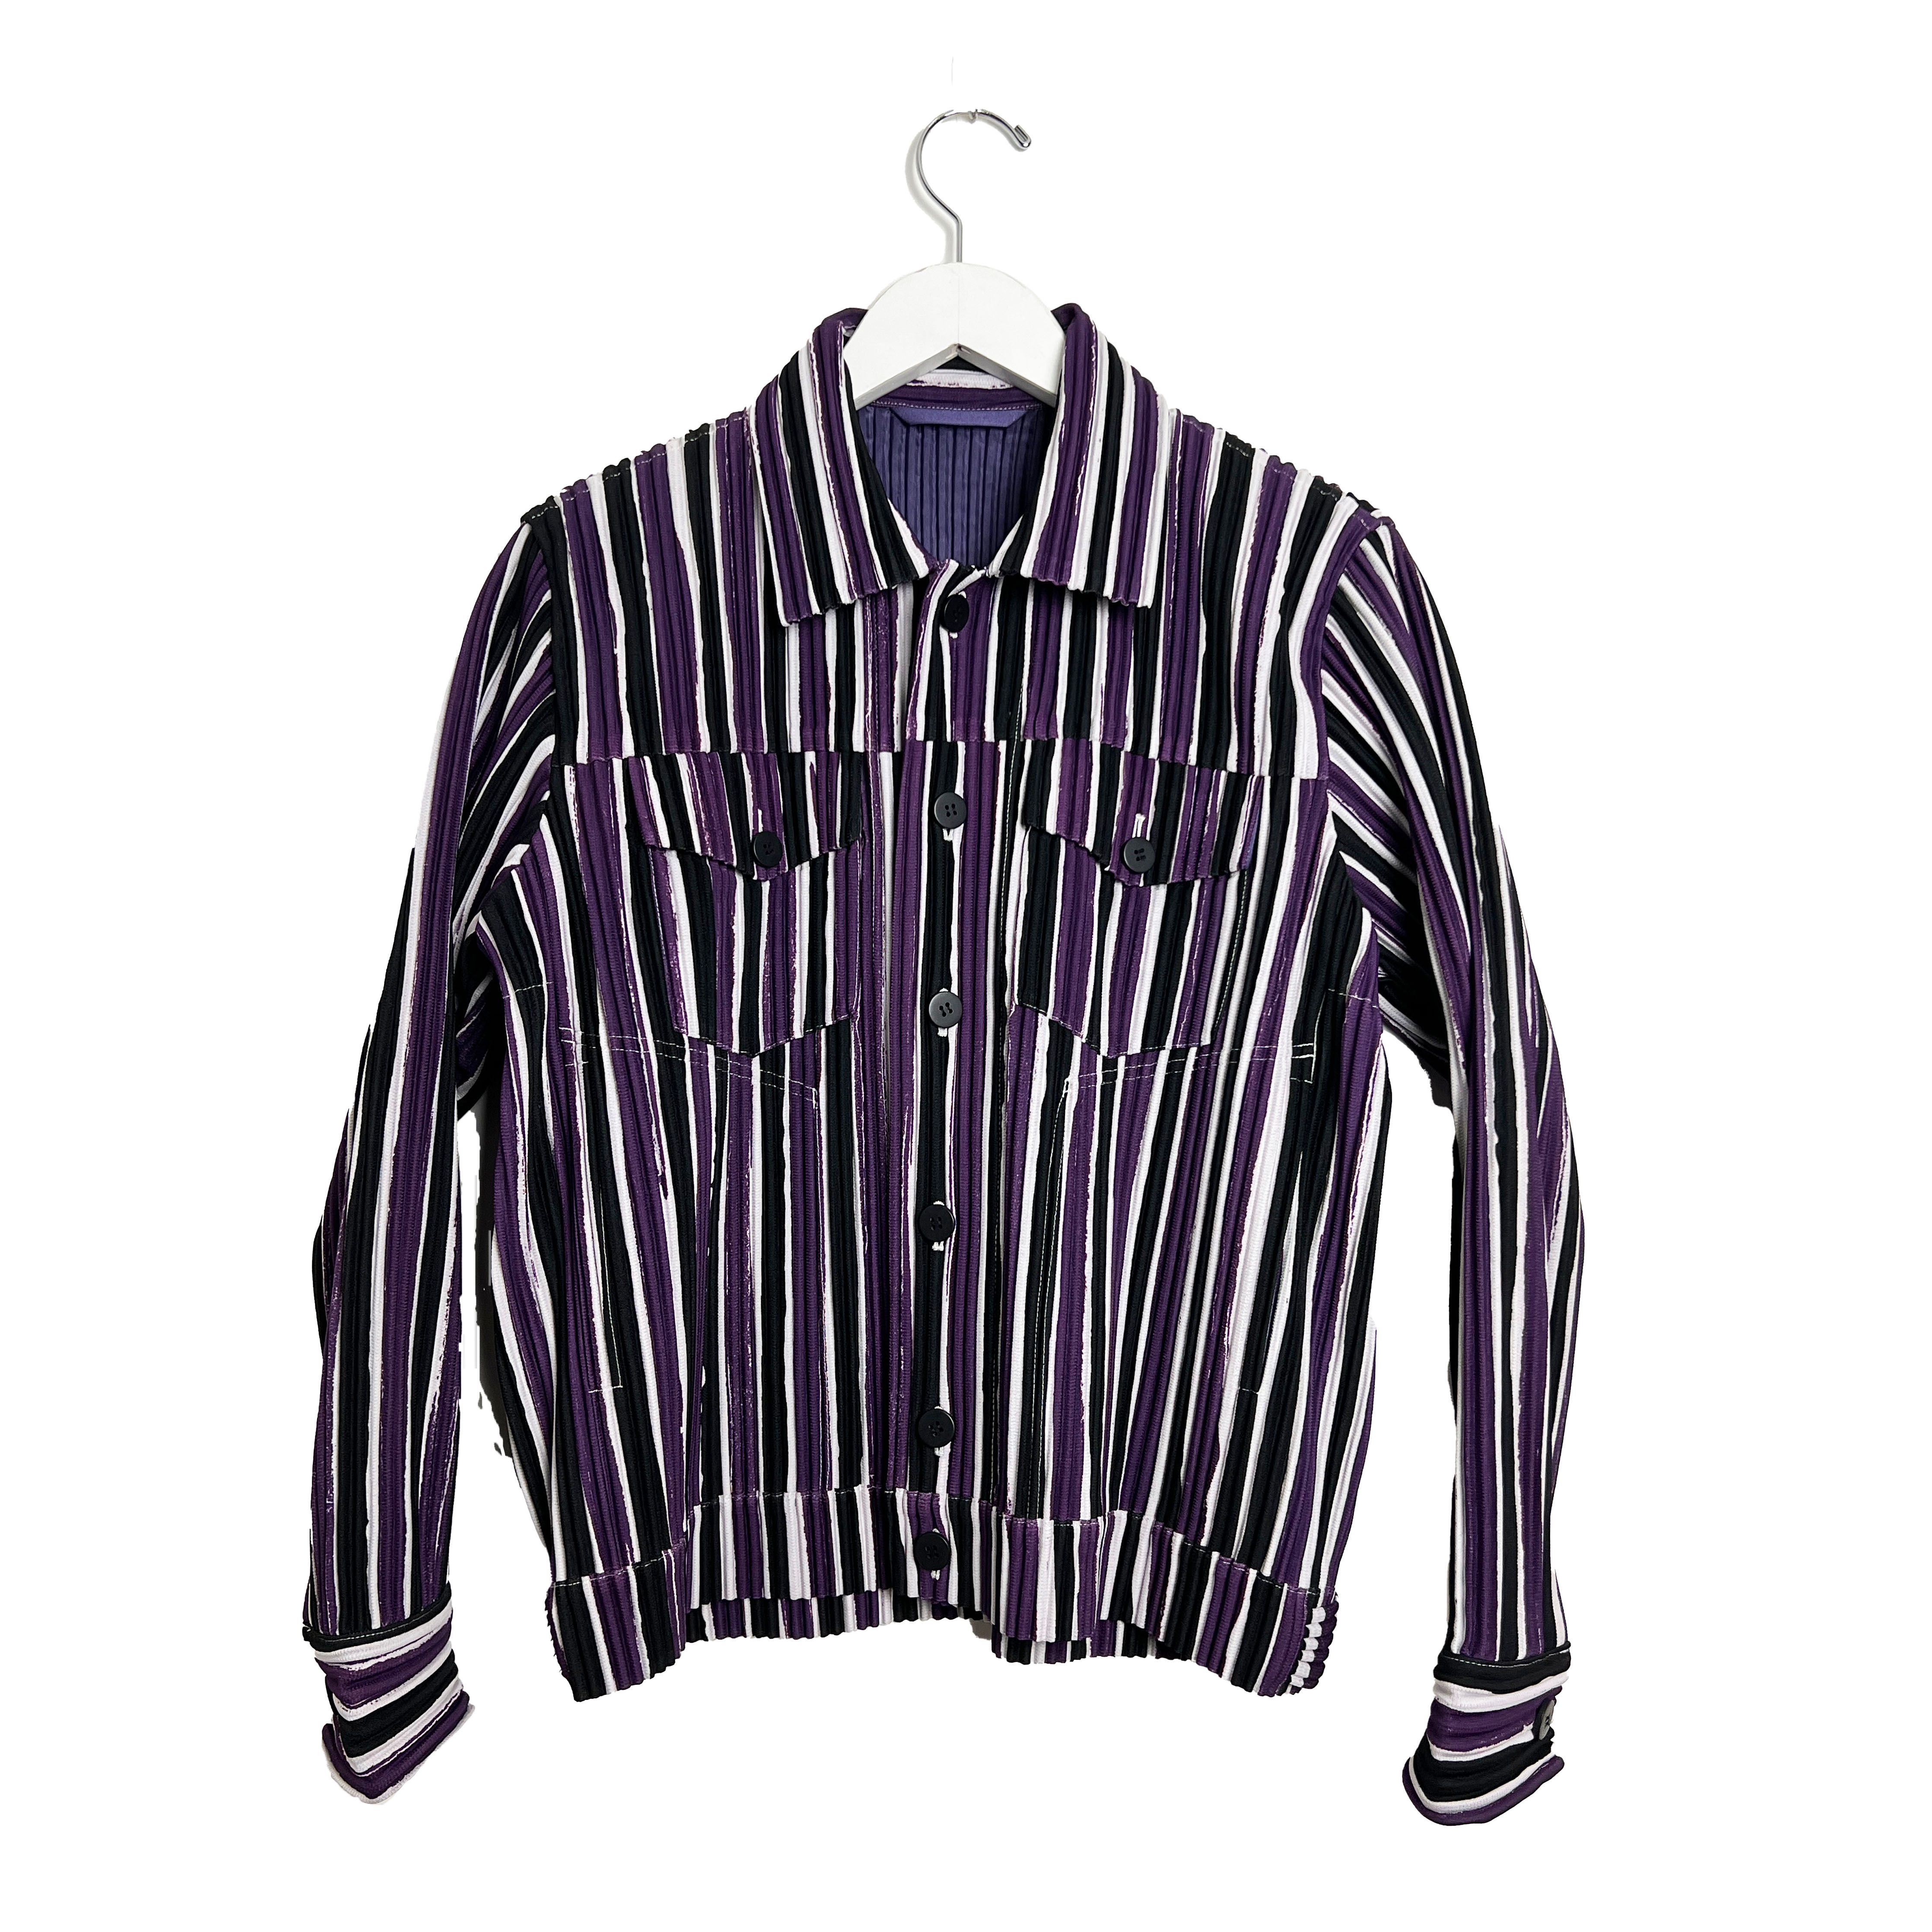 Issey Miyake Homme Plisse Striped Trucker Jacket Size US S / EU 44-46 / 1 - 1 Preview